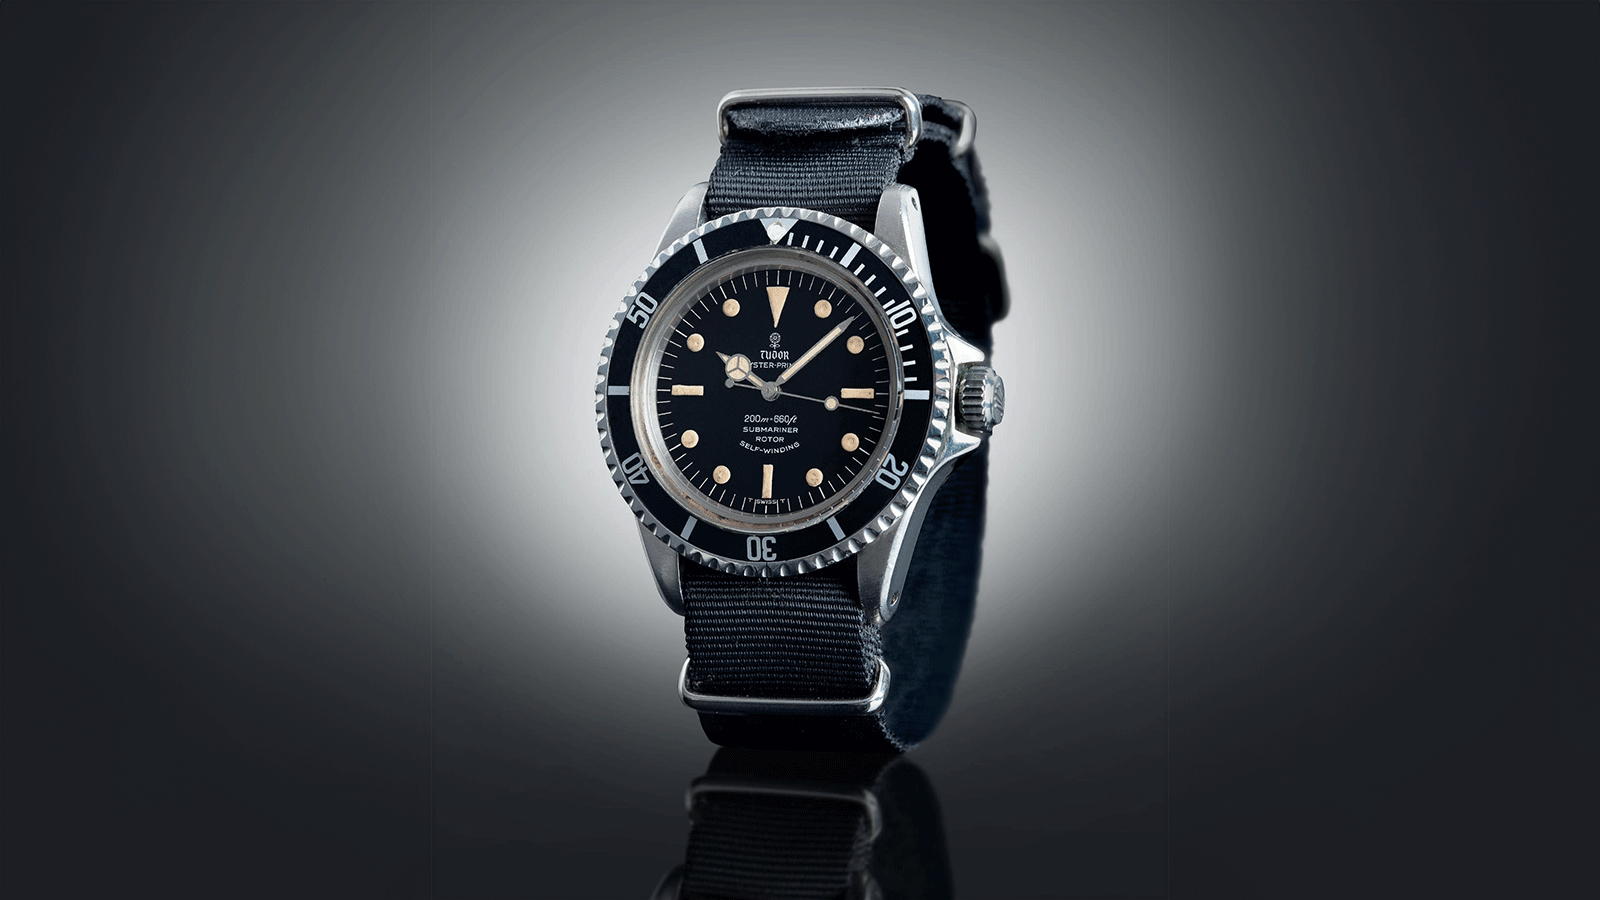 The TUDOR Oyster Prince Submariner shown here, reference 7928, with pointed crown guards, was produced in 1964.